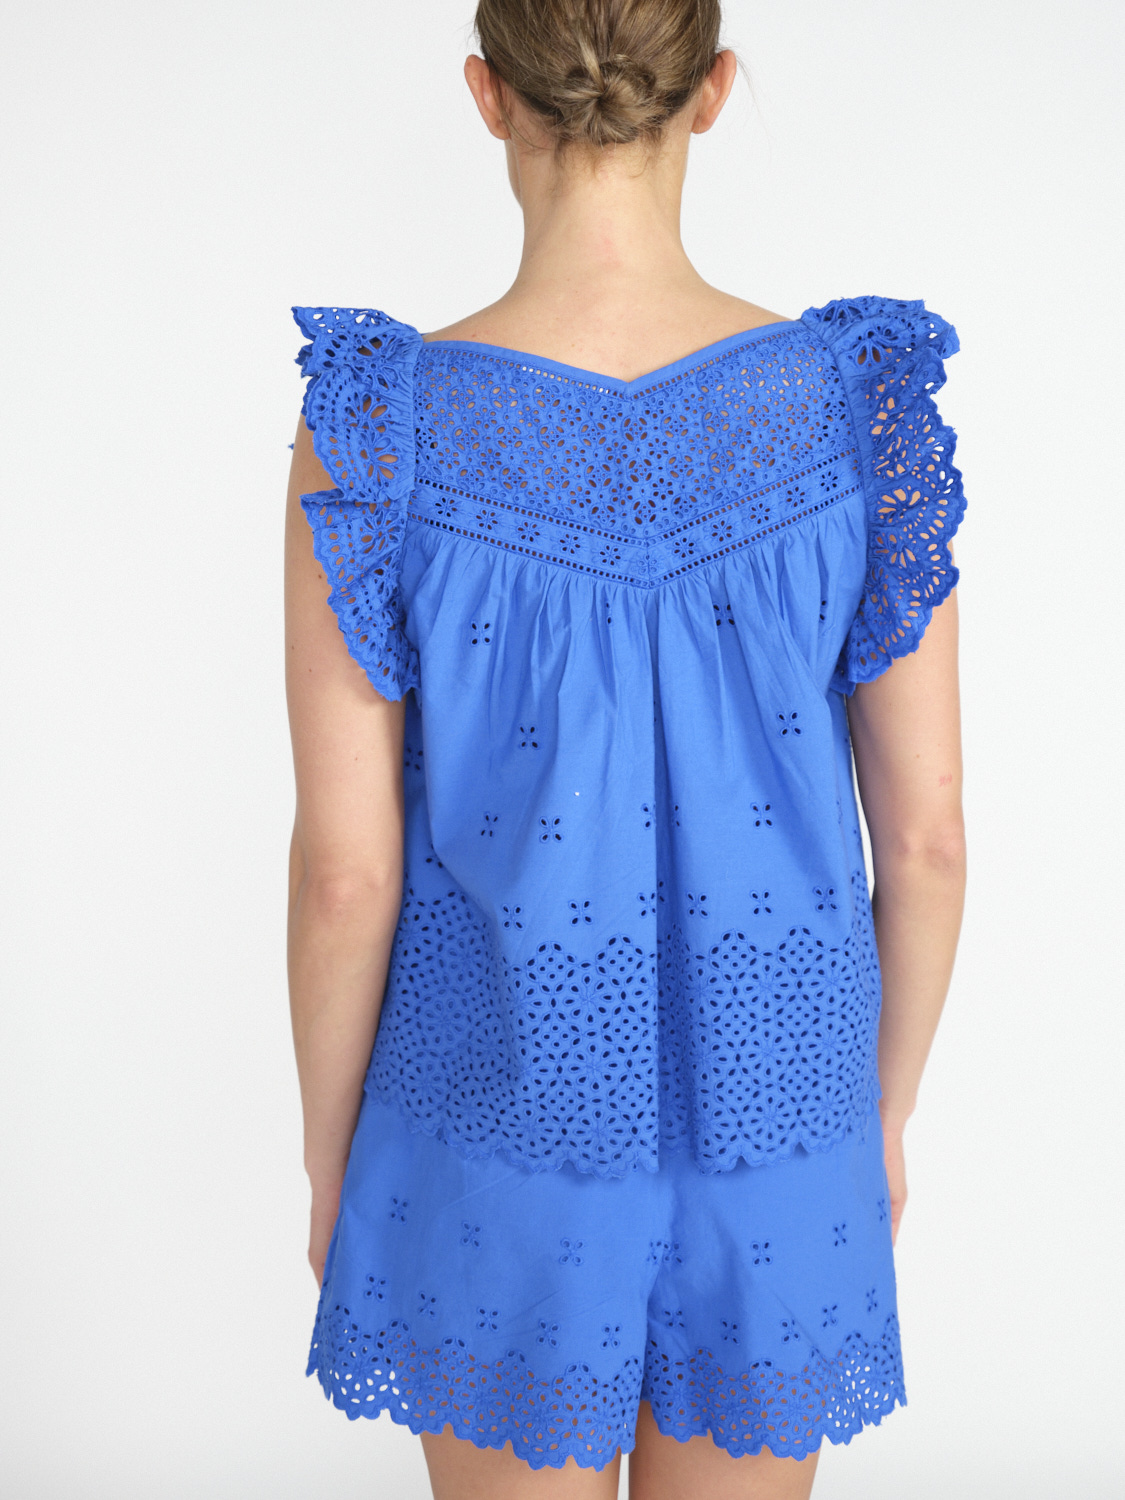 Ulla Johnson Leona Top – playful top with a hole pattern  blue 34